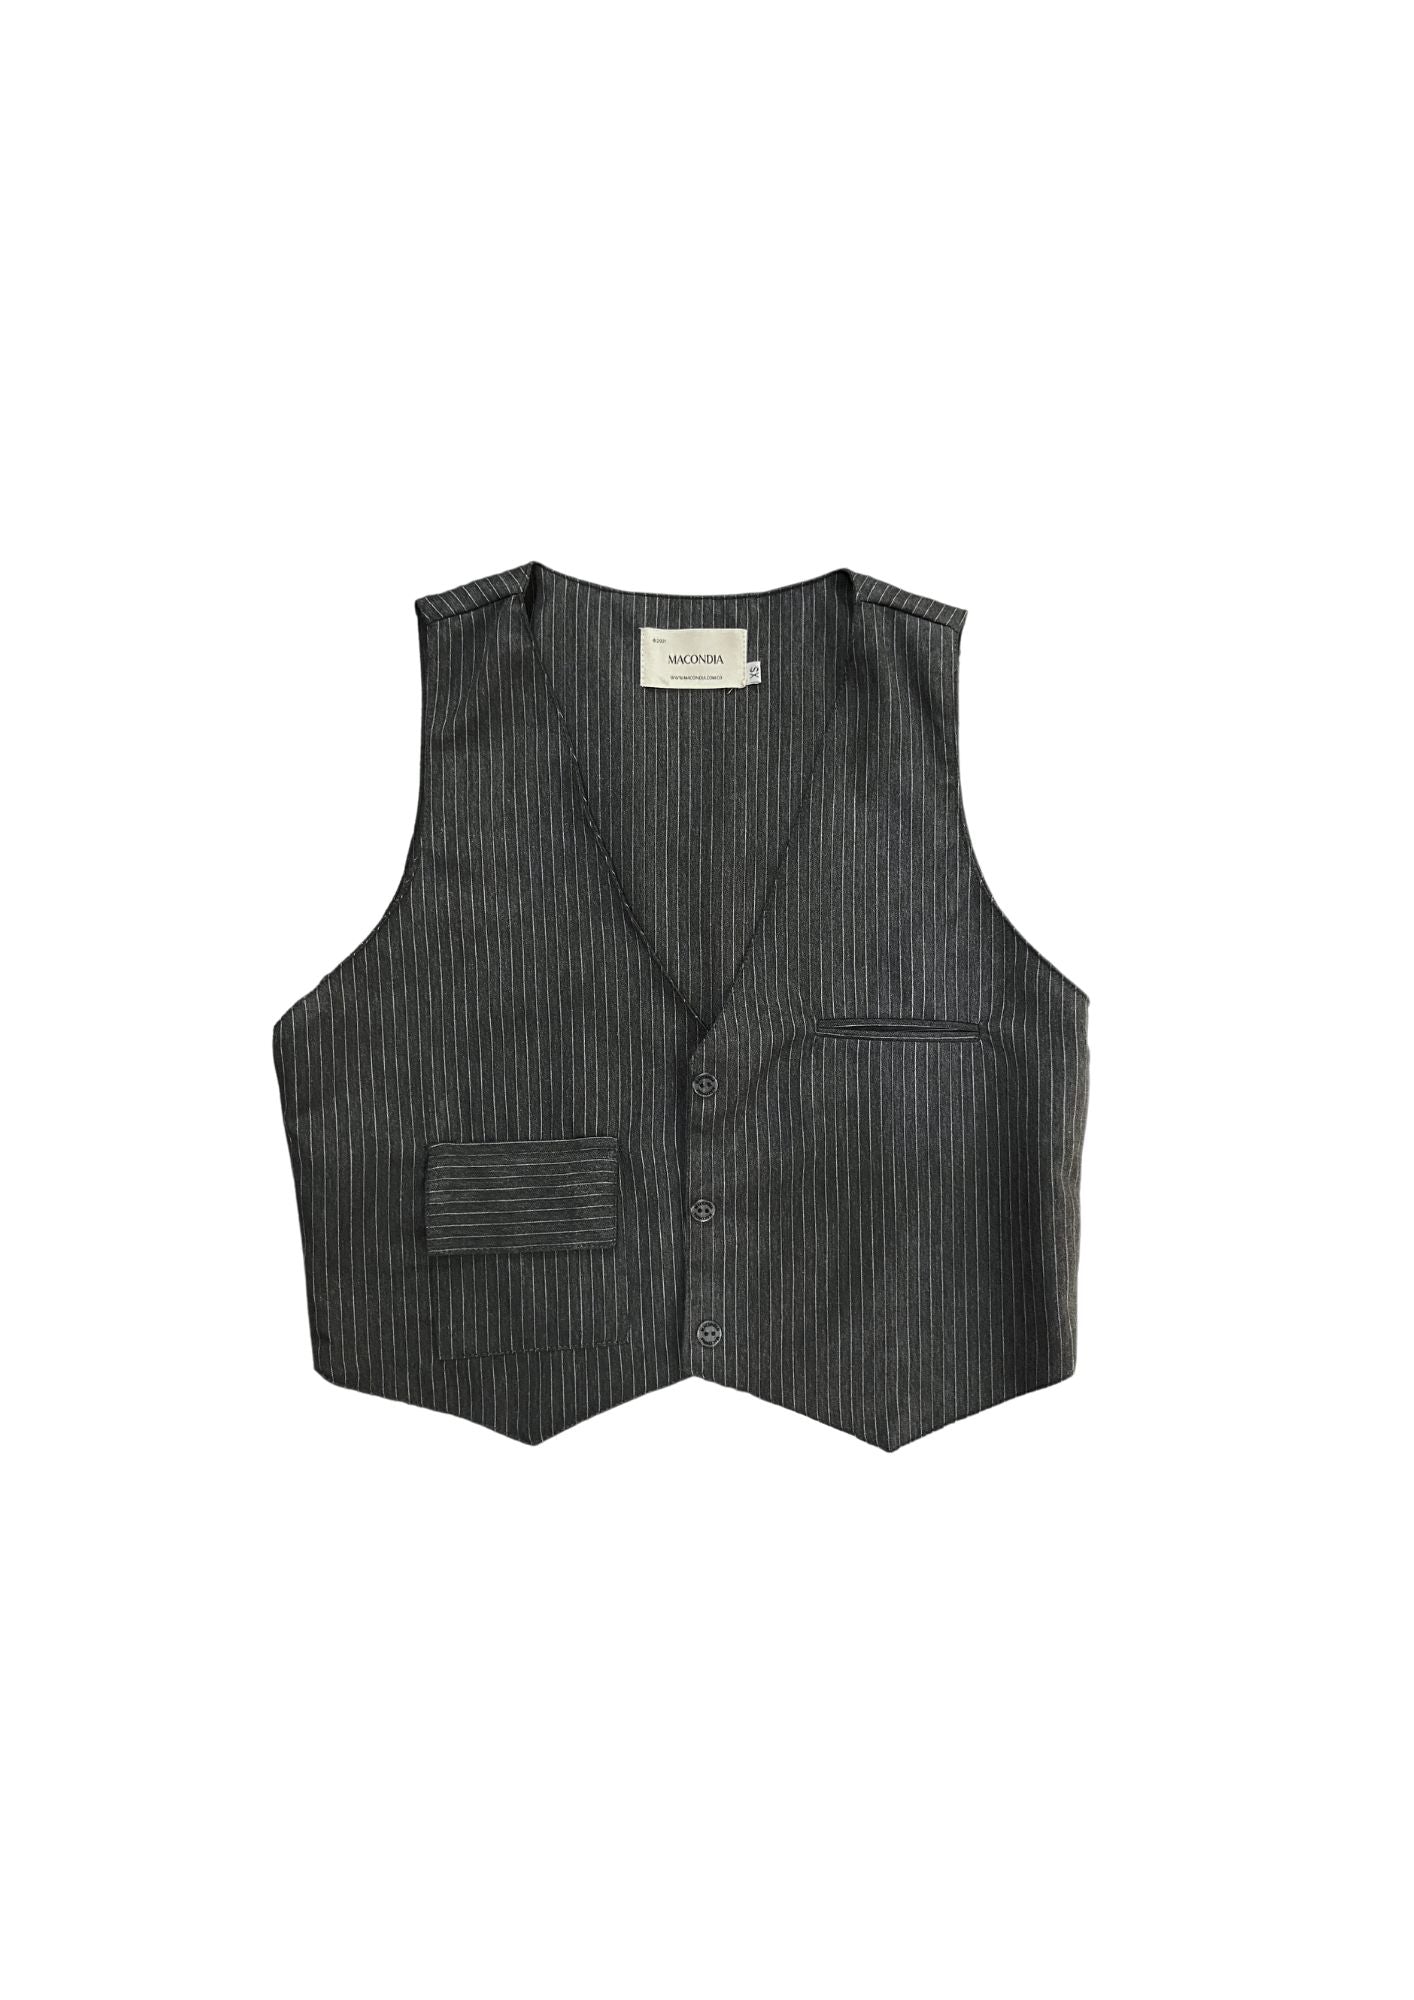 THE OFFICE VEST